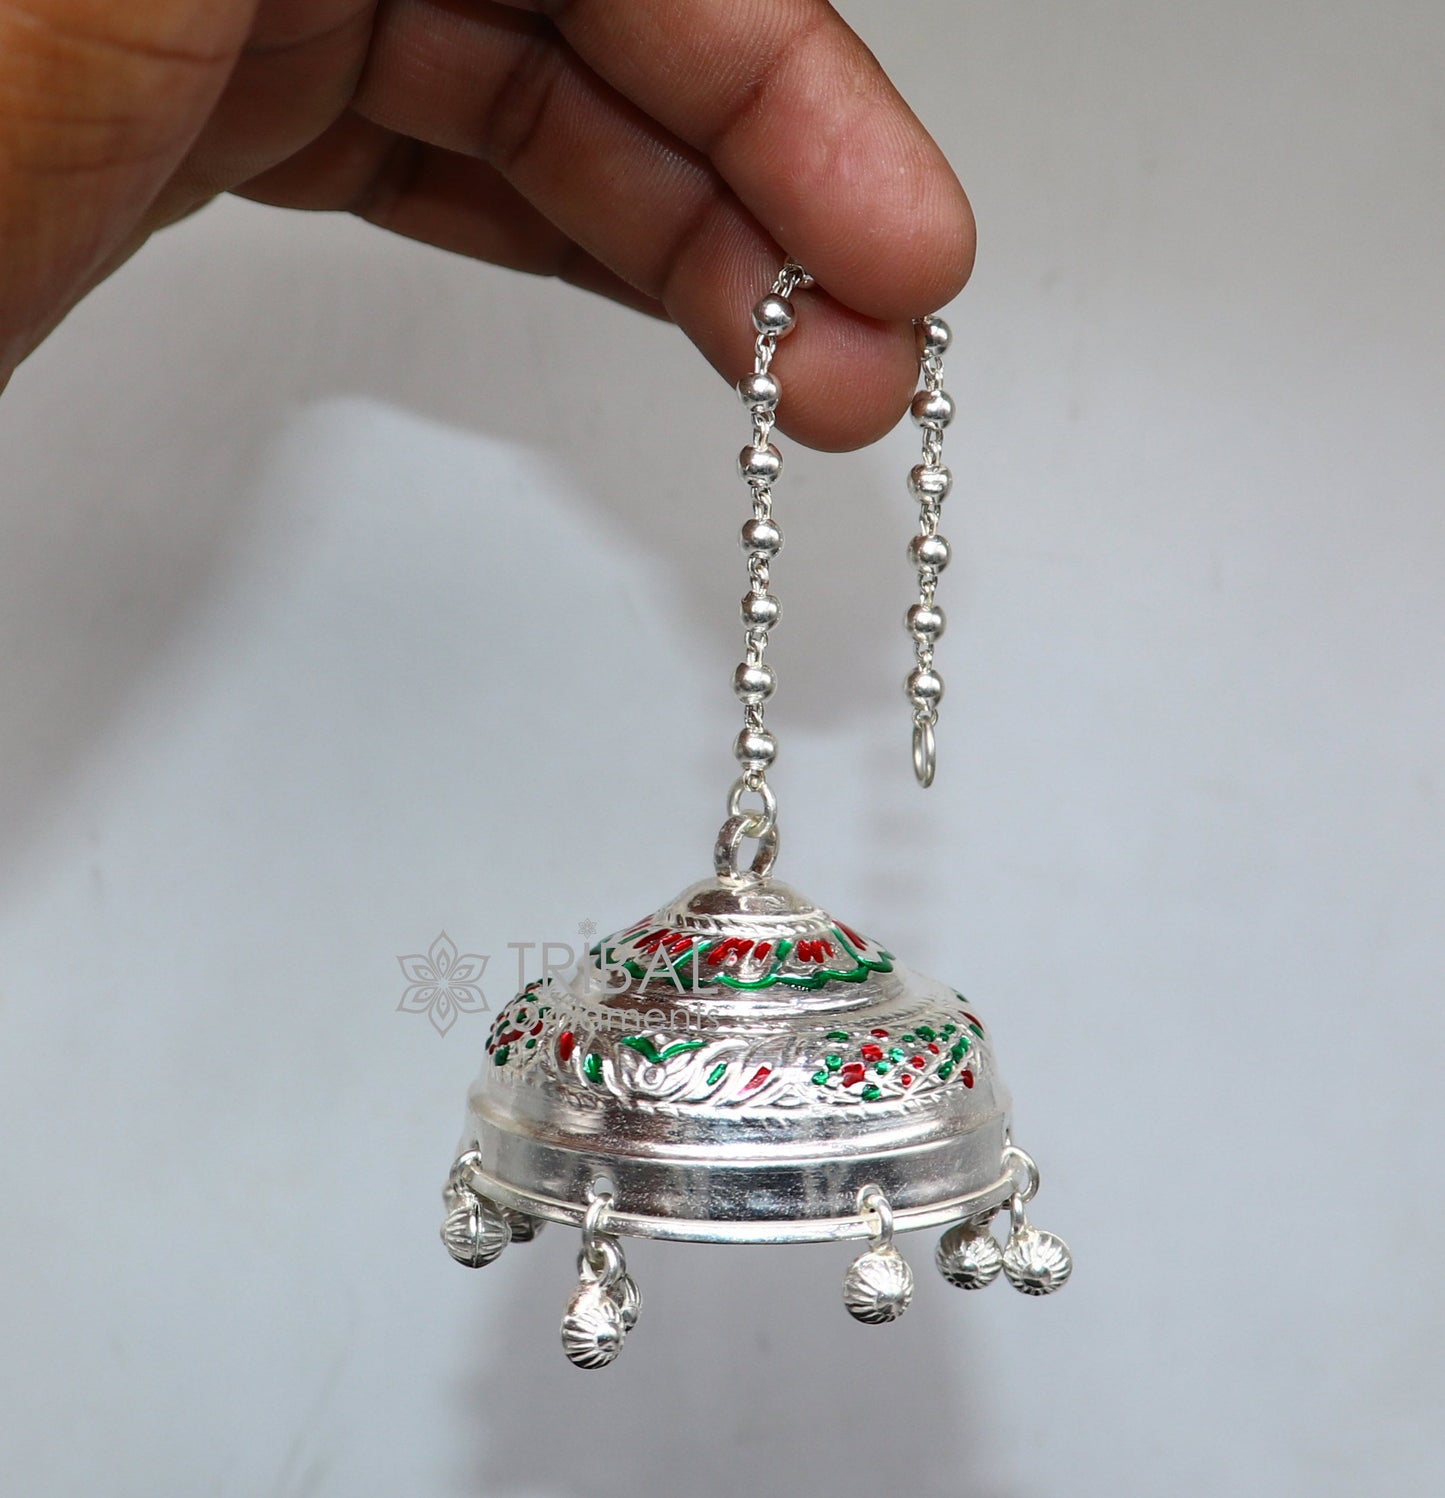 925 sterling Silver chatter/chatar, silver umbrella god temple art, Silver chandelier for temple Puja worshipping utensils su1117 - TRIBAL ORNAMENTS